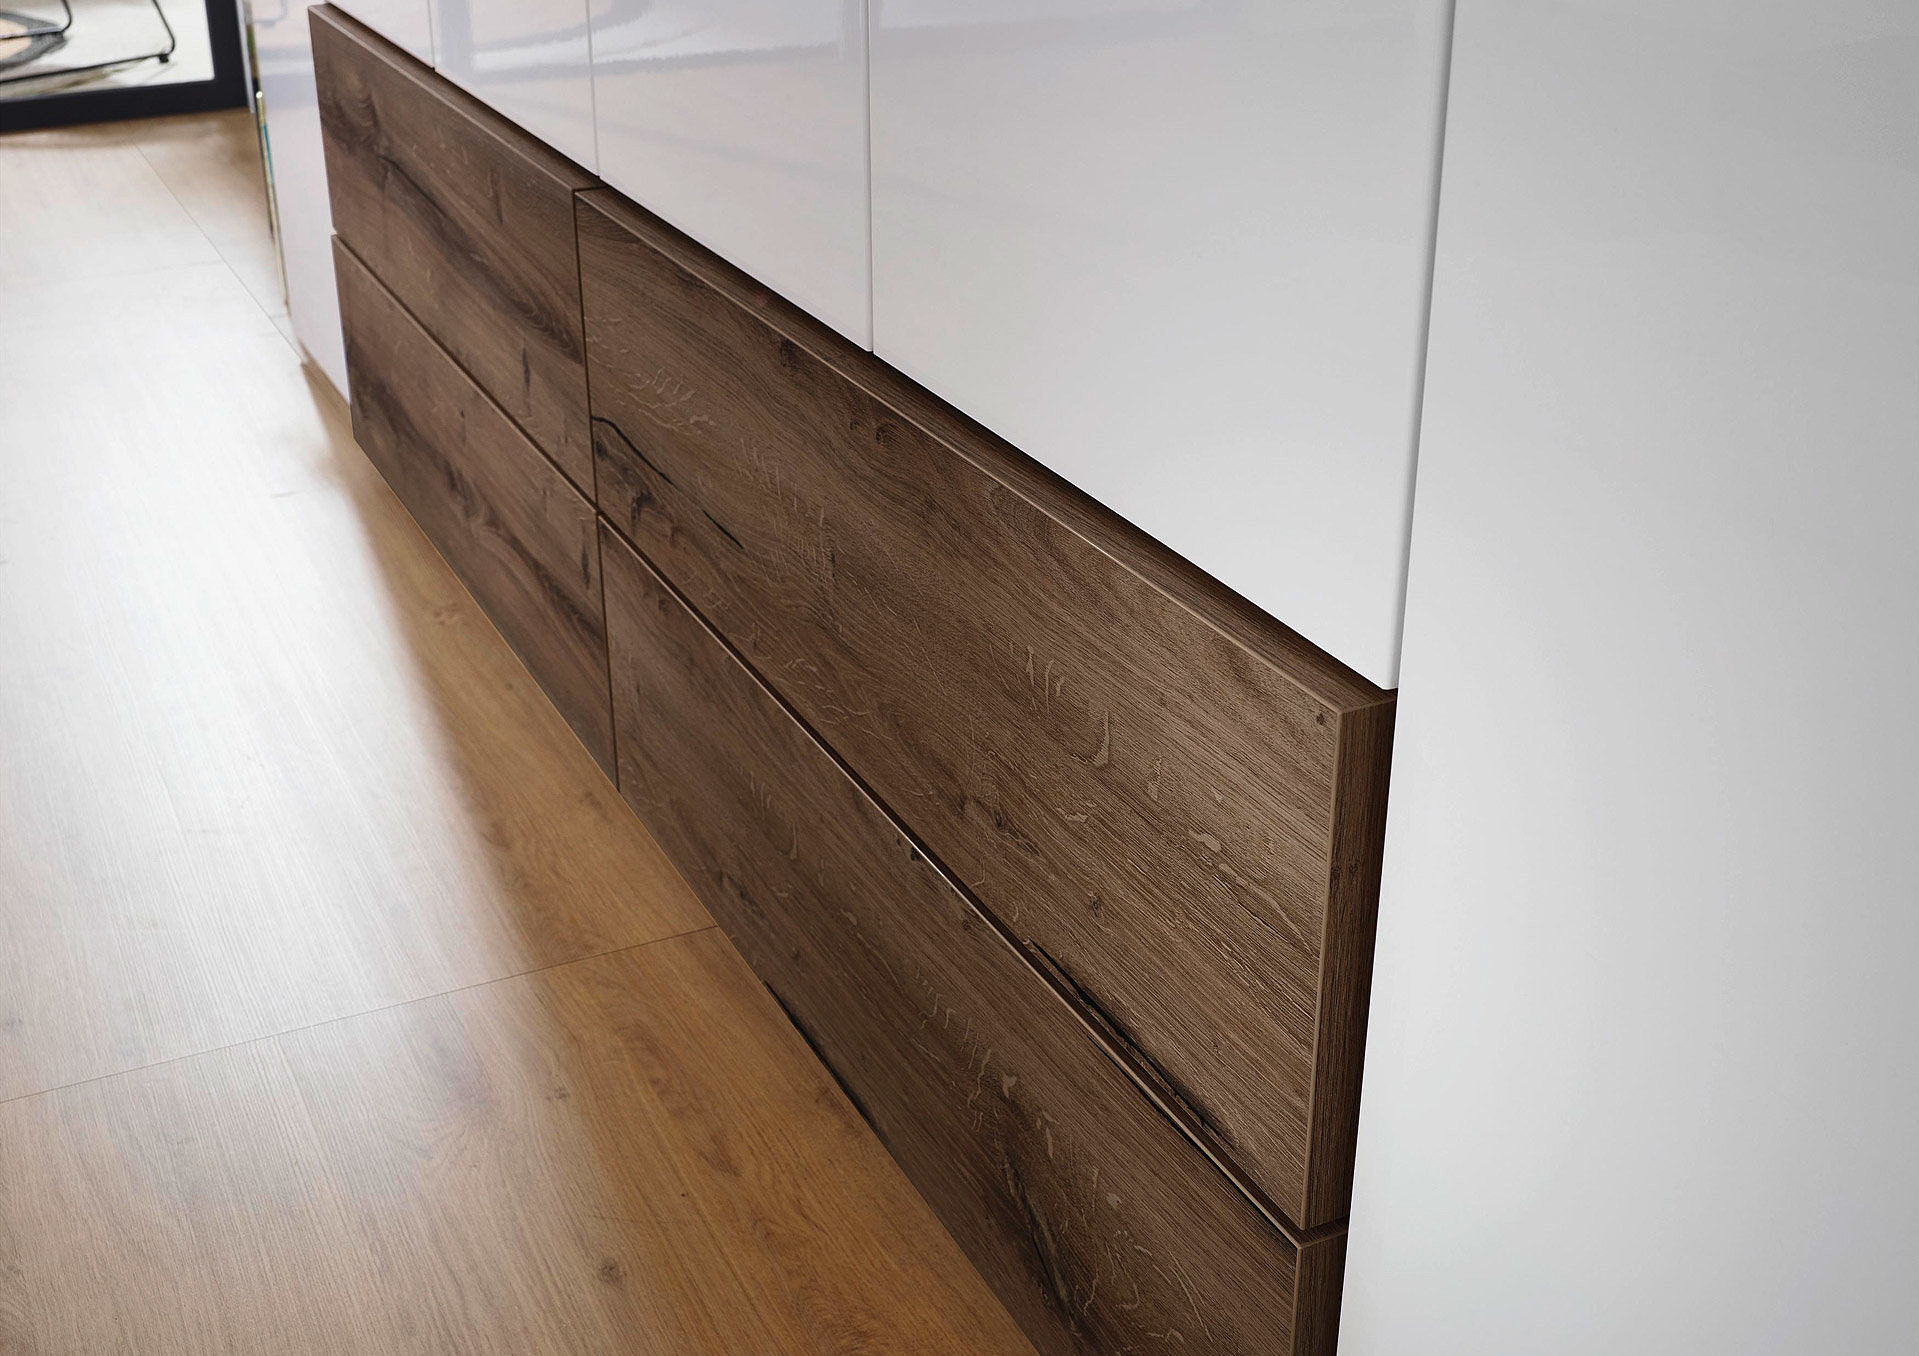 Cabinet cladding - solid wood